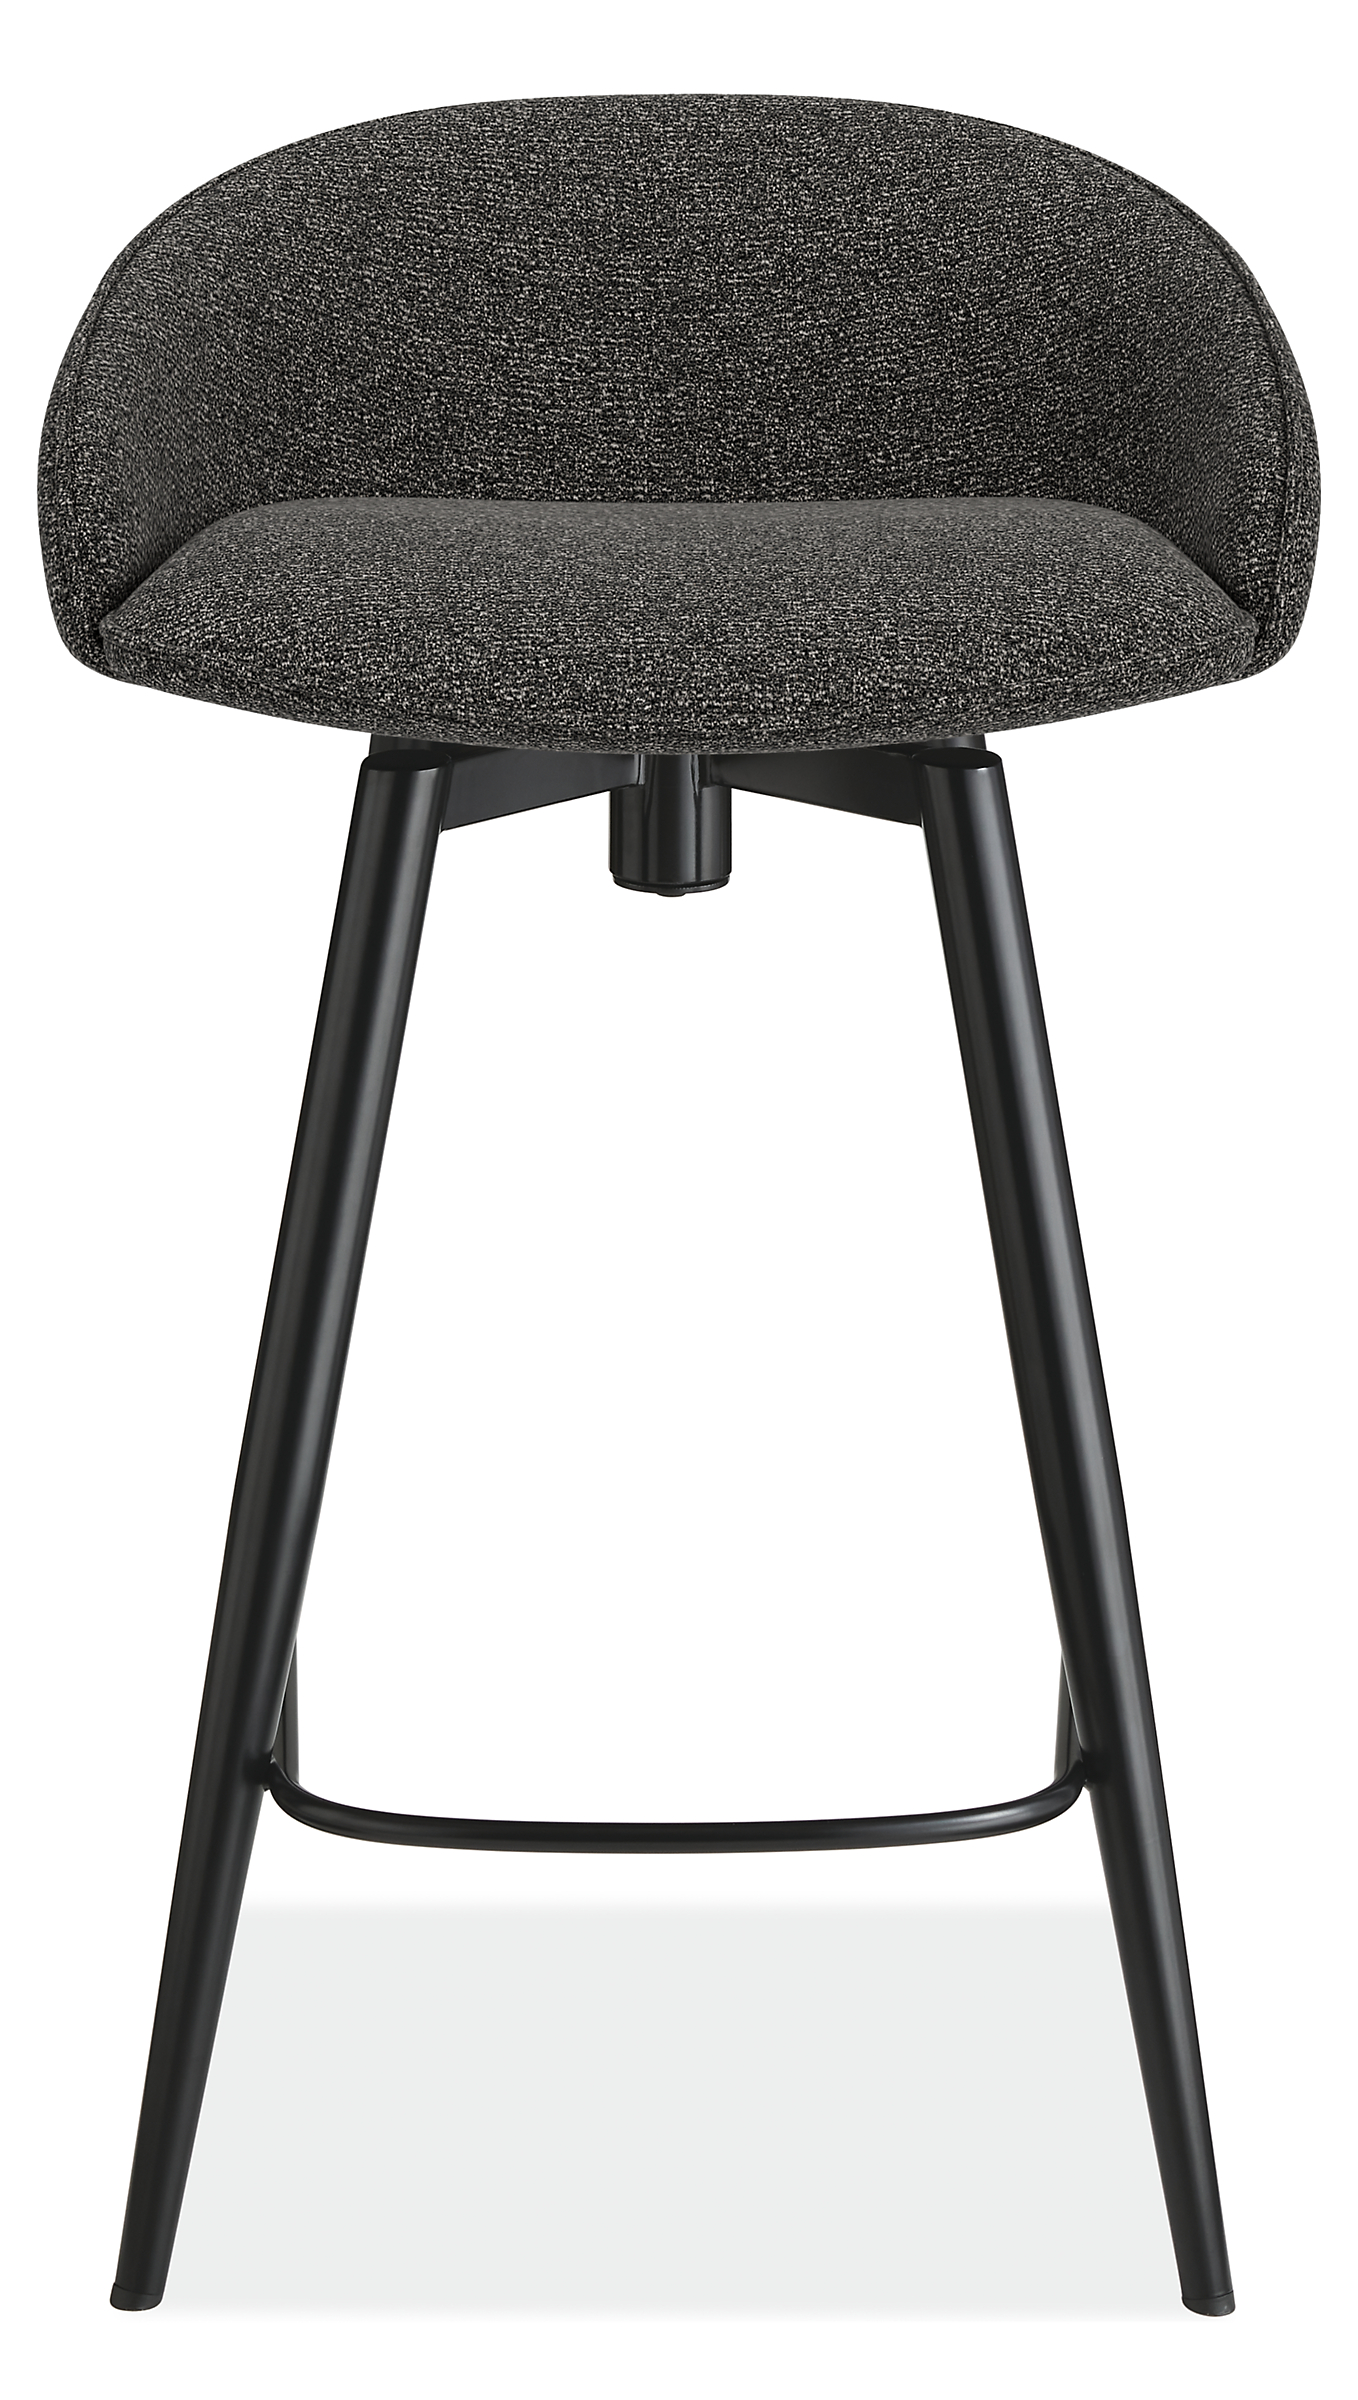 Front view of Sylvan Swivel Counter Stool in Radford Grey Fabric and graphite base.